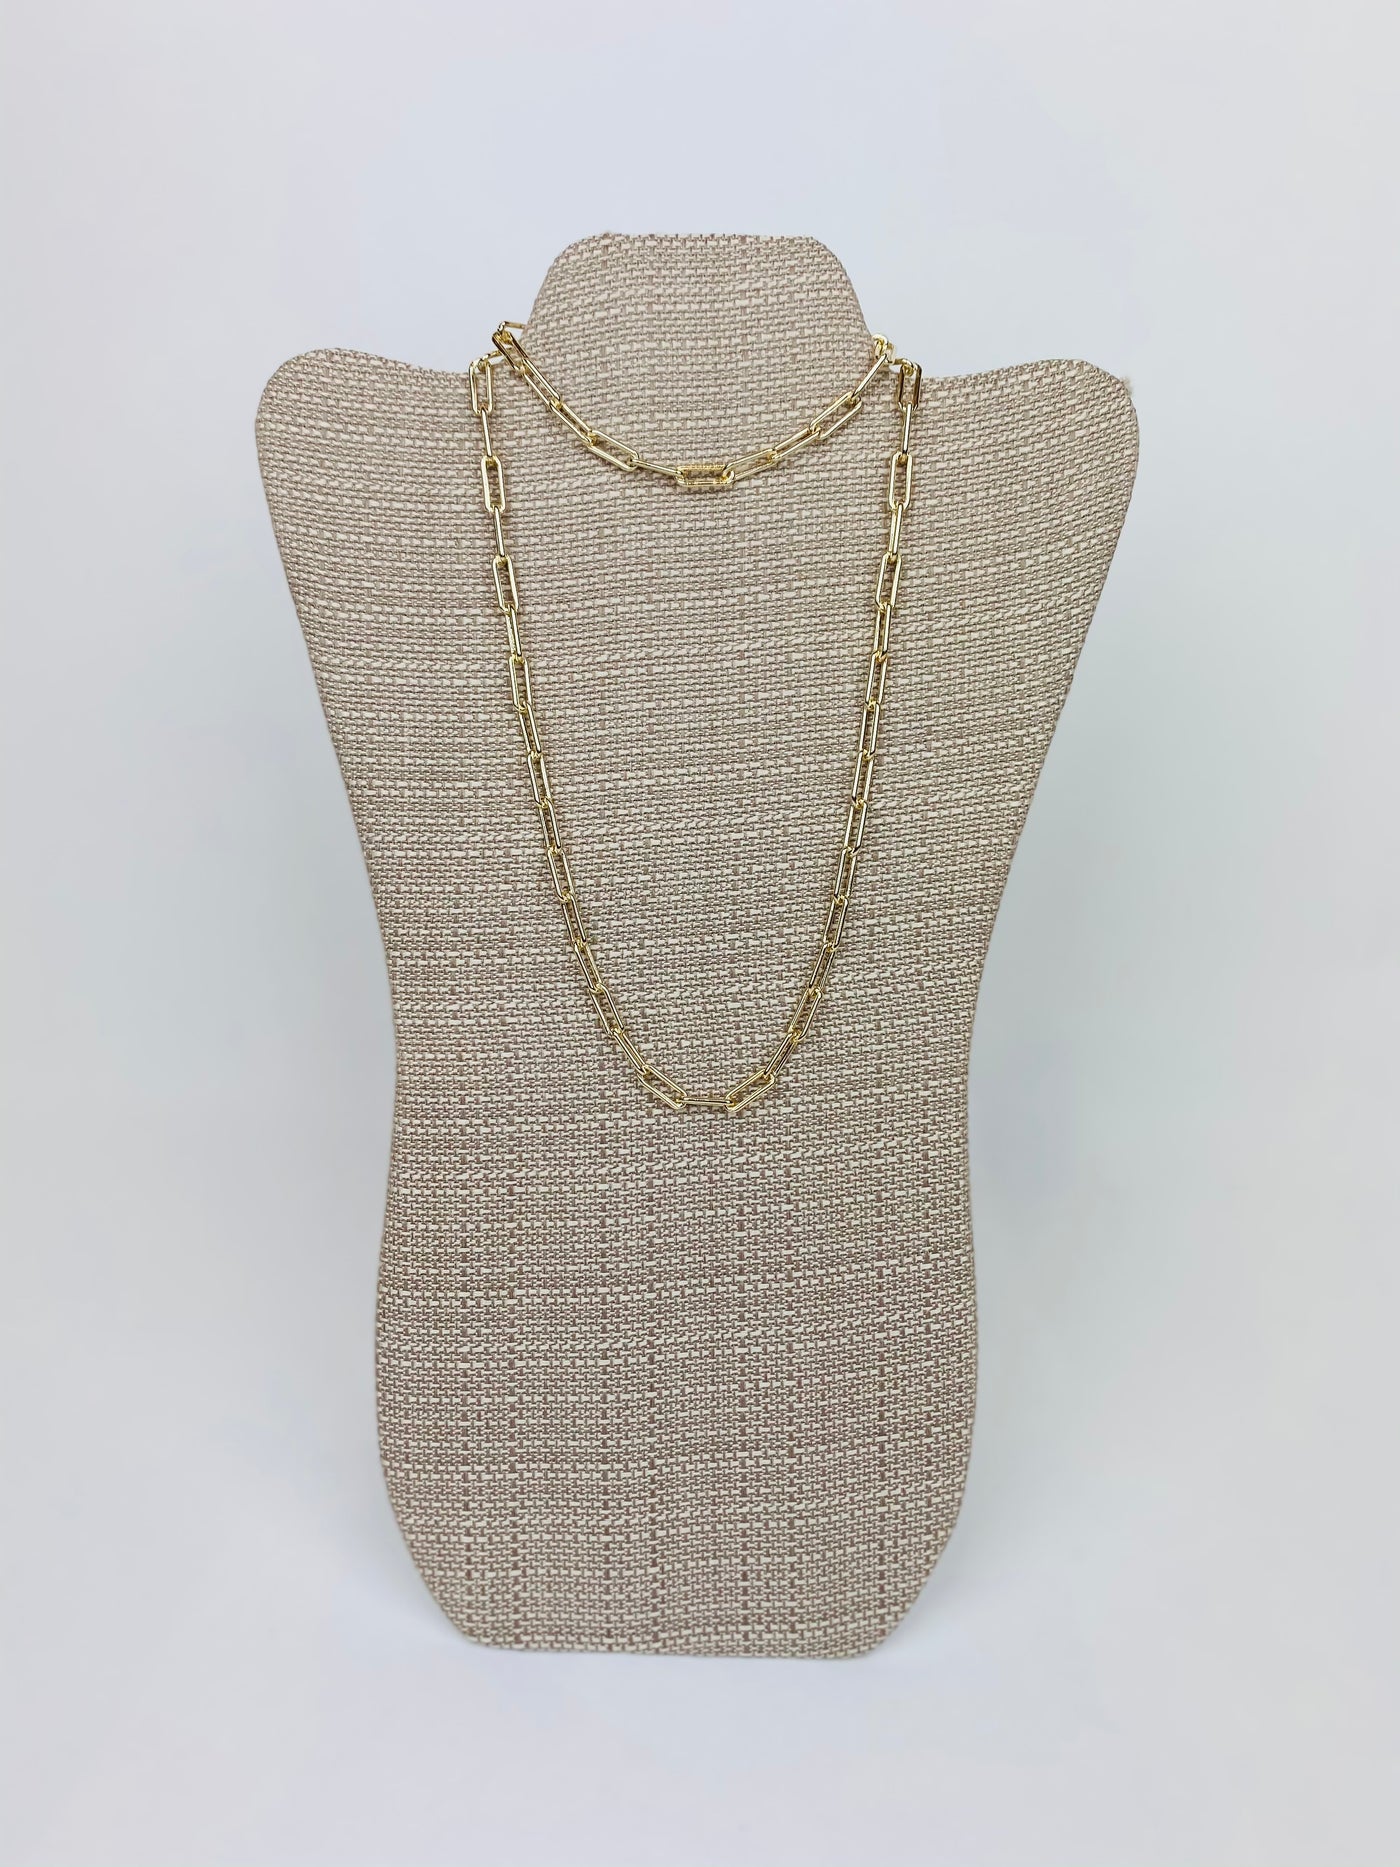 Stunning Fashionable Designer Replica Paper Clip Necklace- Sold out!